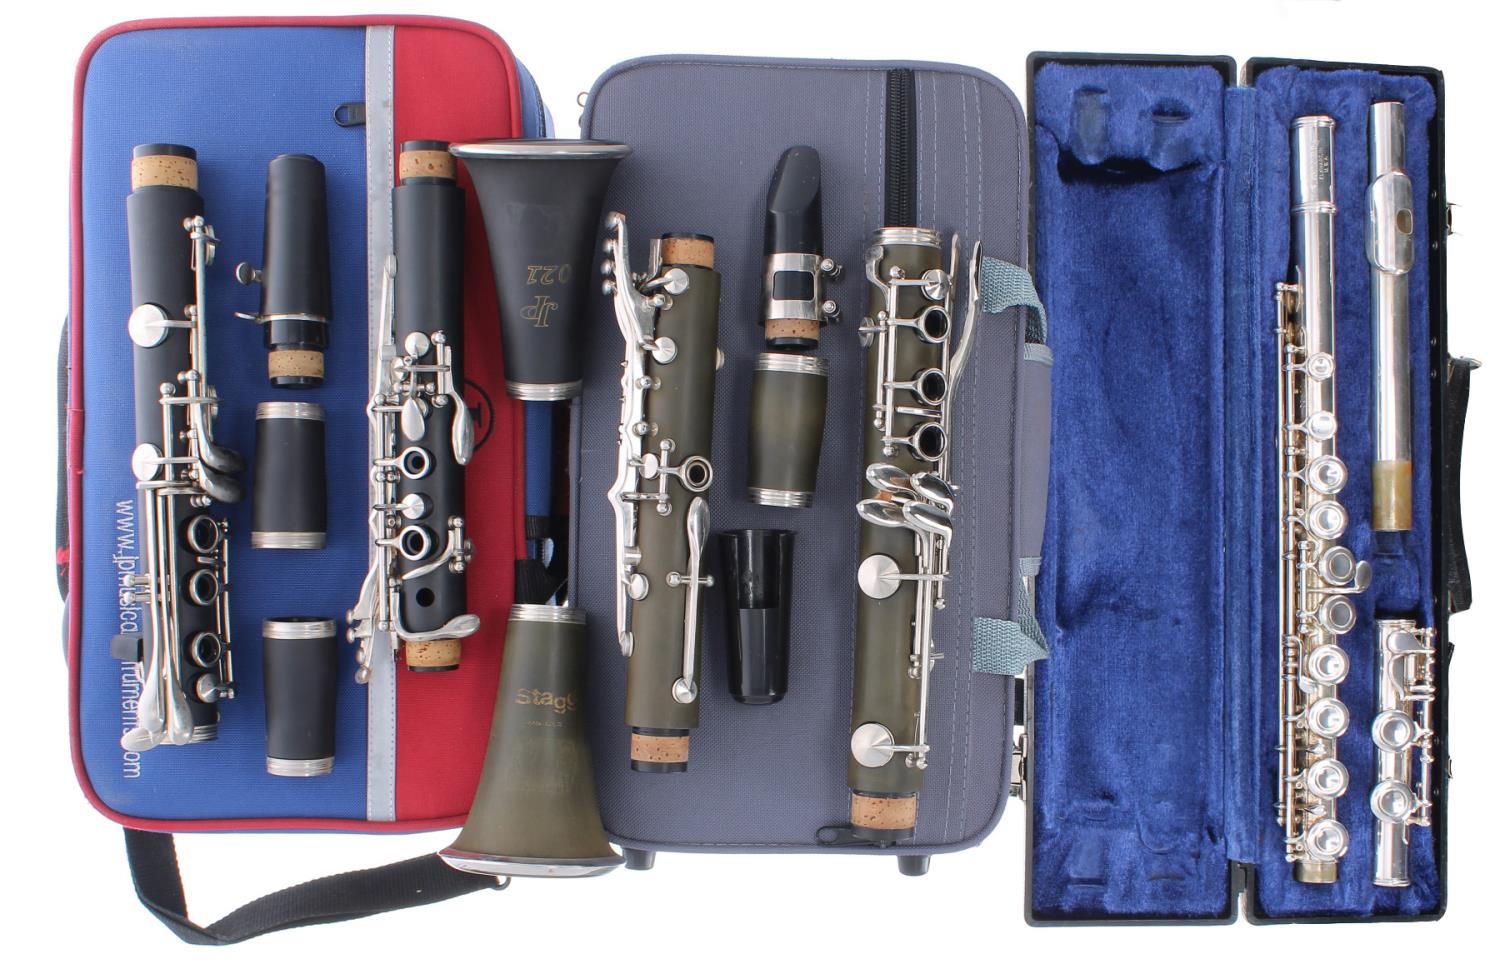 JP021 Model B flat clarinet outfit, case; also a Stagg B flat clarinet outfit and a Blessing metal